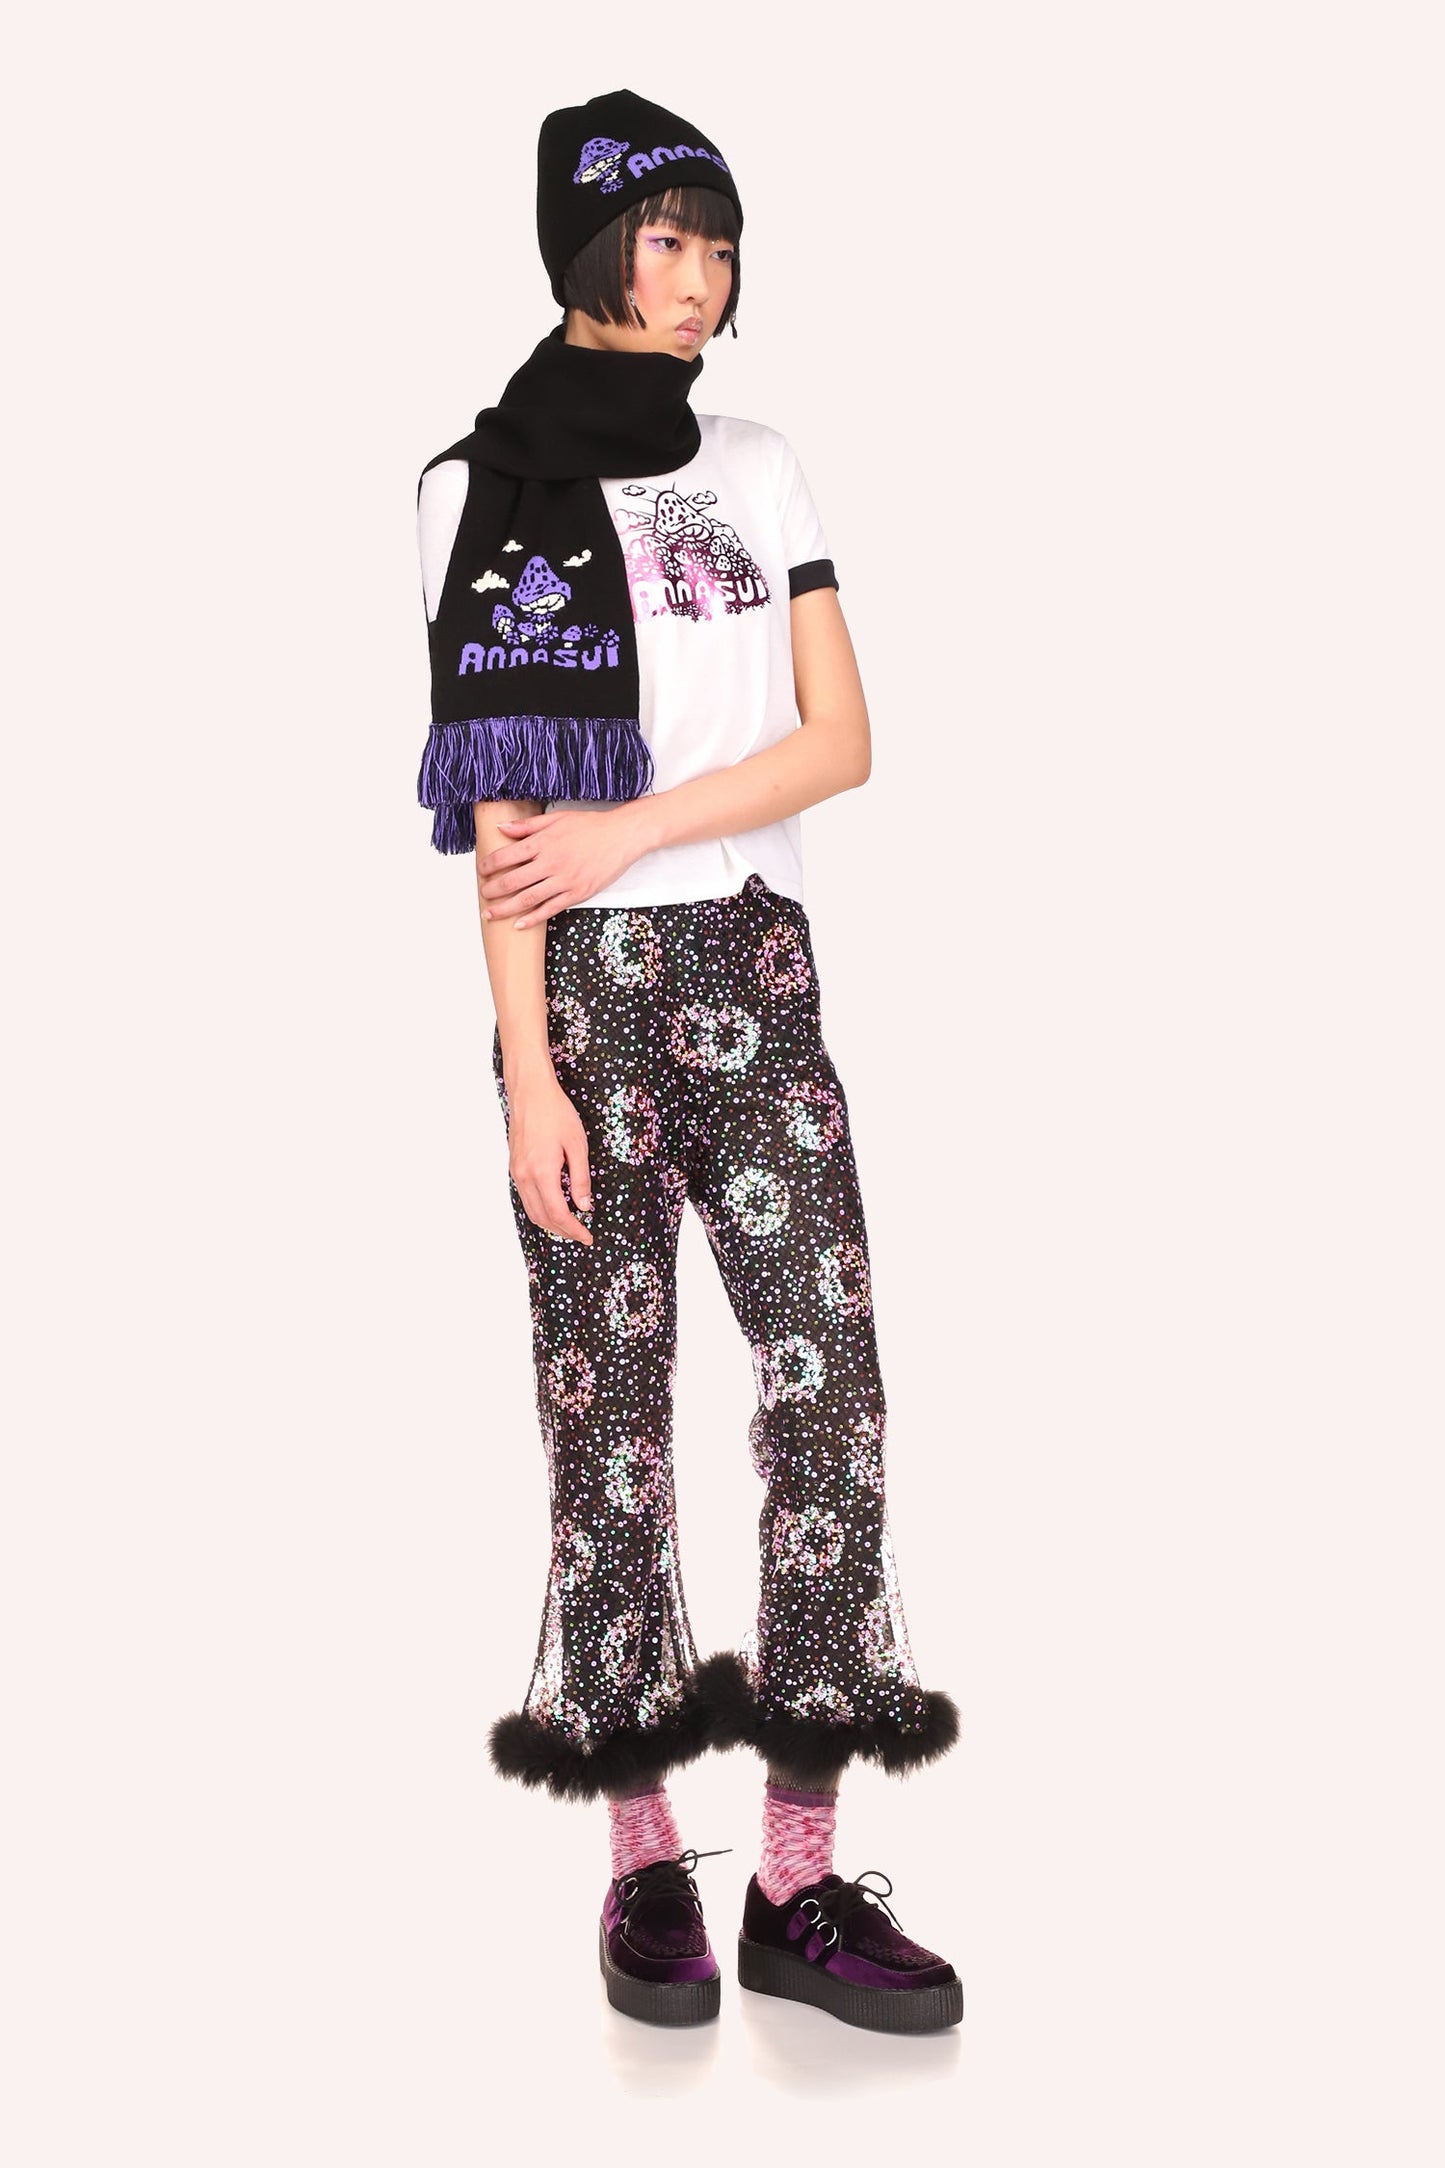 Black Mushroom Beanie, a large purple design with Anna Sui between two large mushrooms